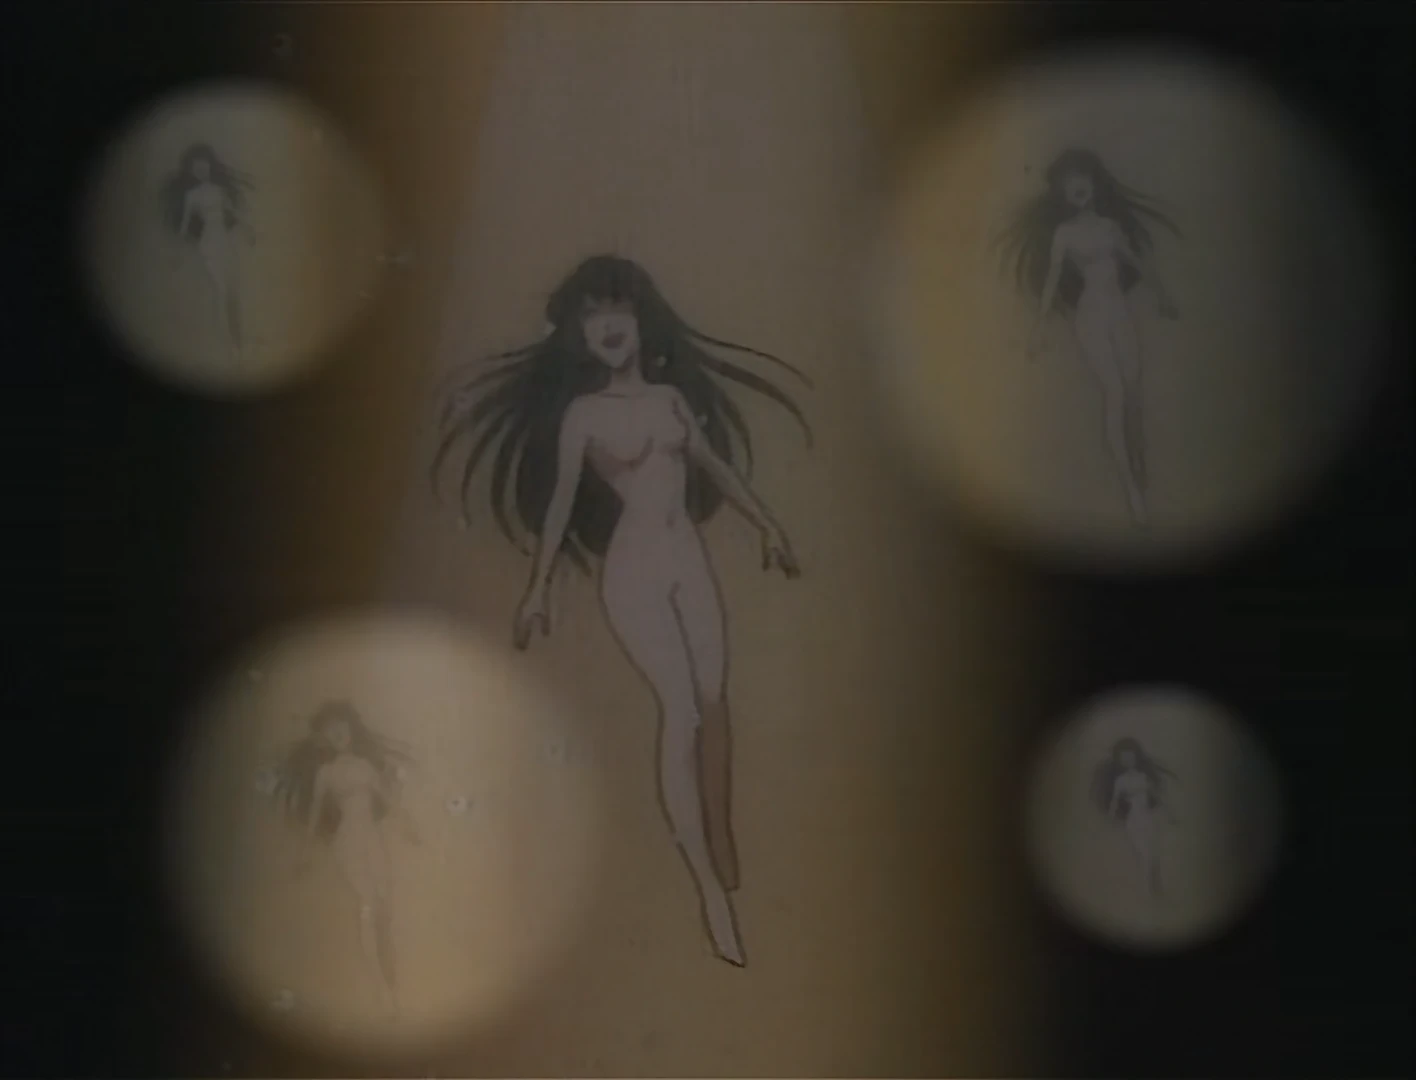 The Super Dimension Fortress Macross: Flash Back 2012 - Lynn Minmay nude fanservice